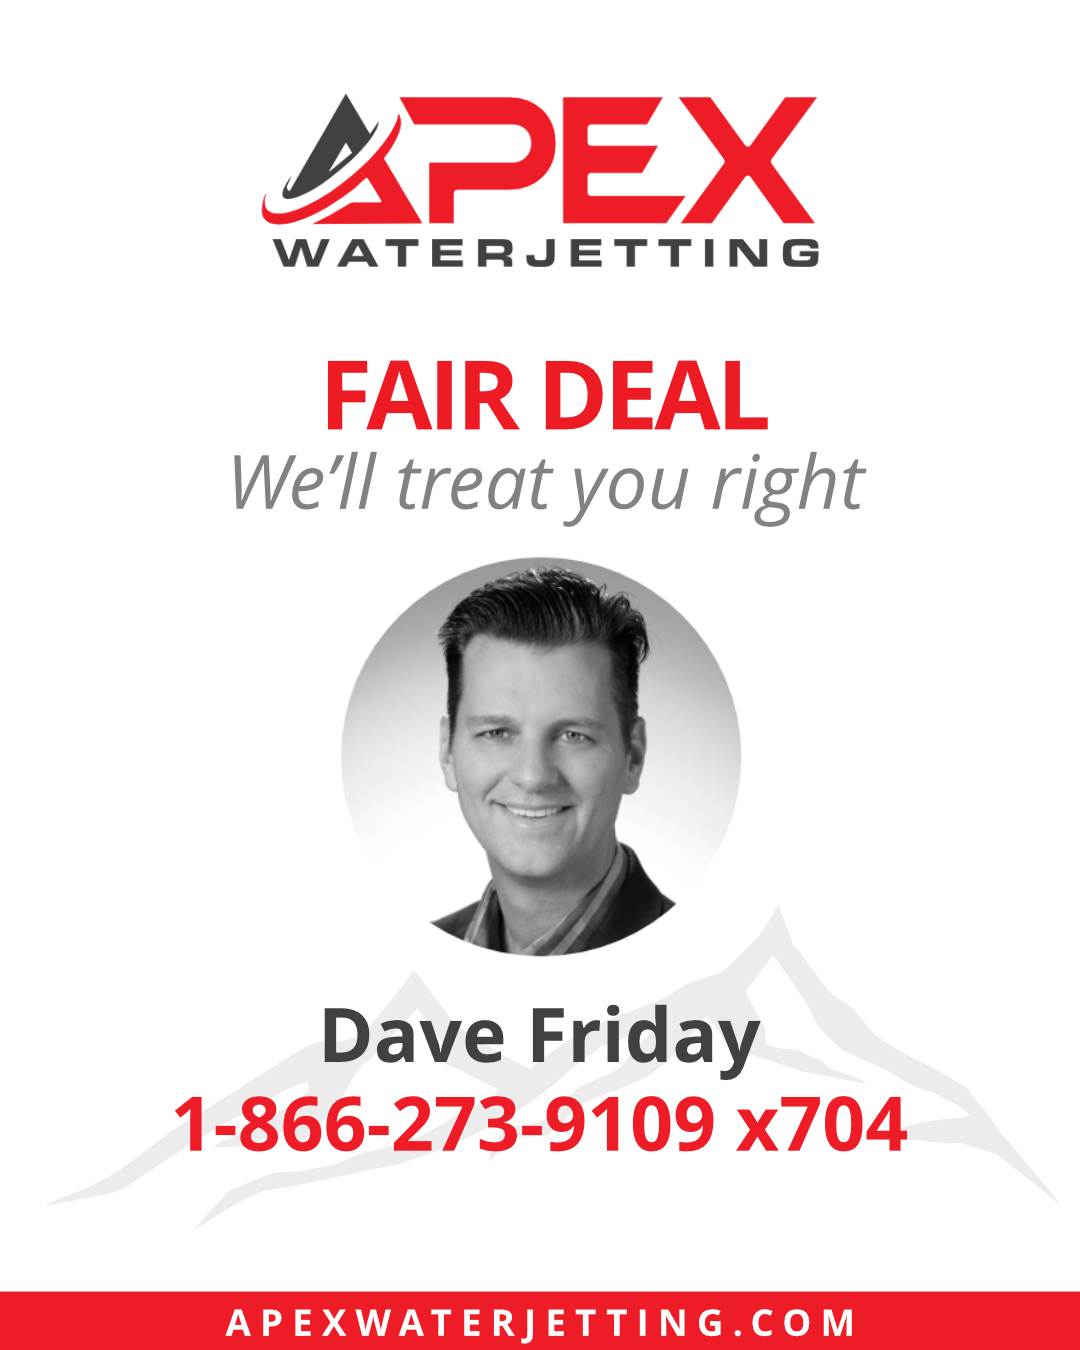 APEX Waterjetting Fair Deal Dave Friday We'll Treat You Right